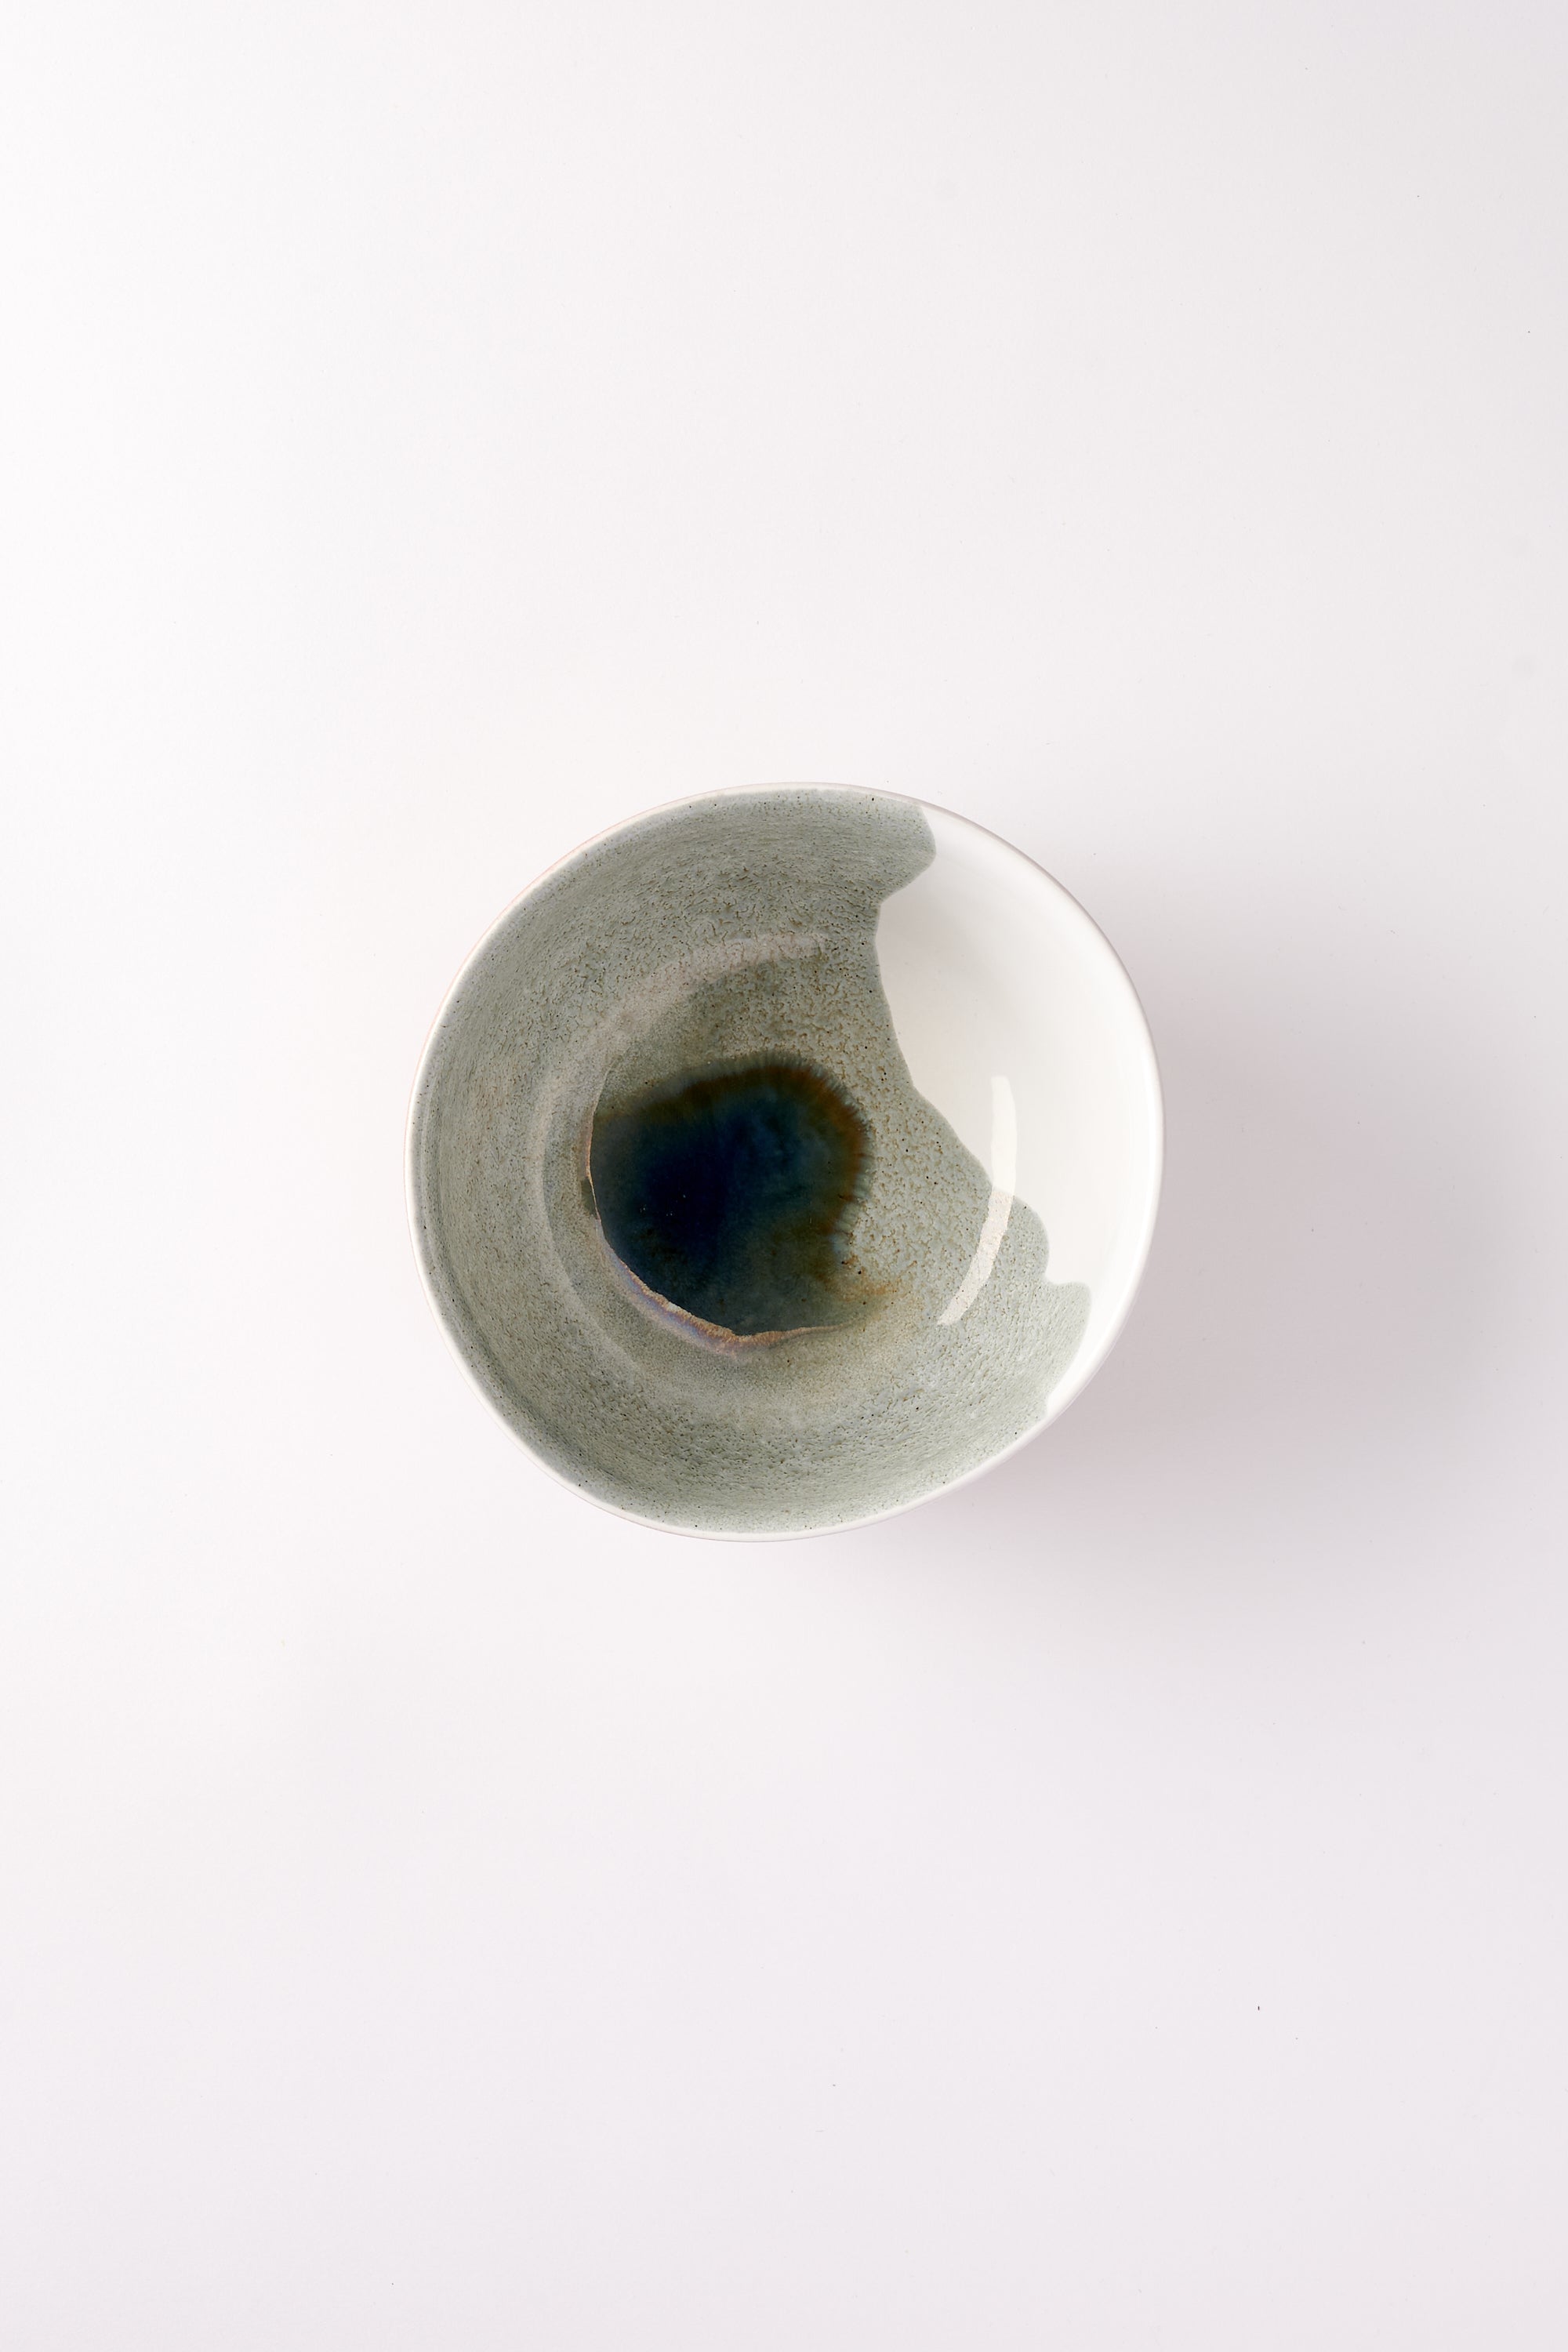 Oriana’s Ashes Cereal Bowl with Moss Overglaze